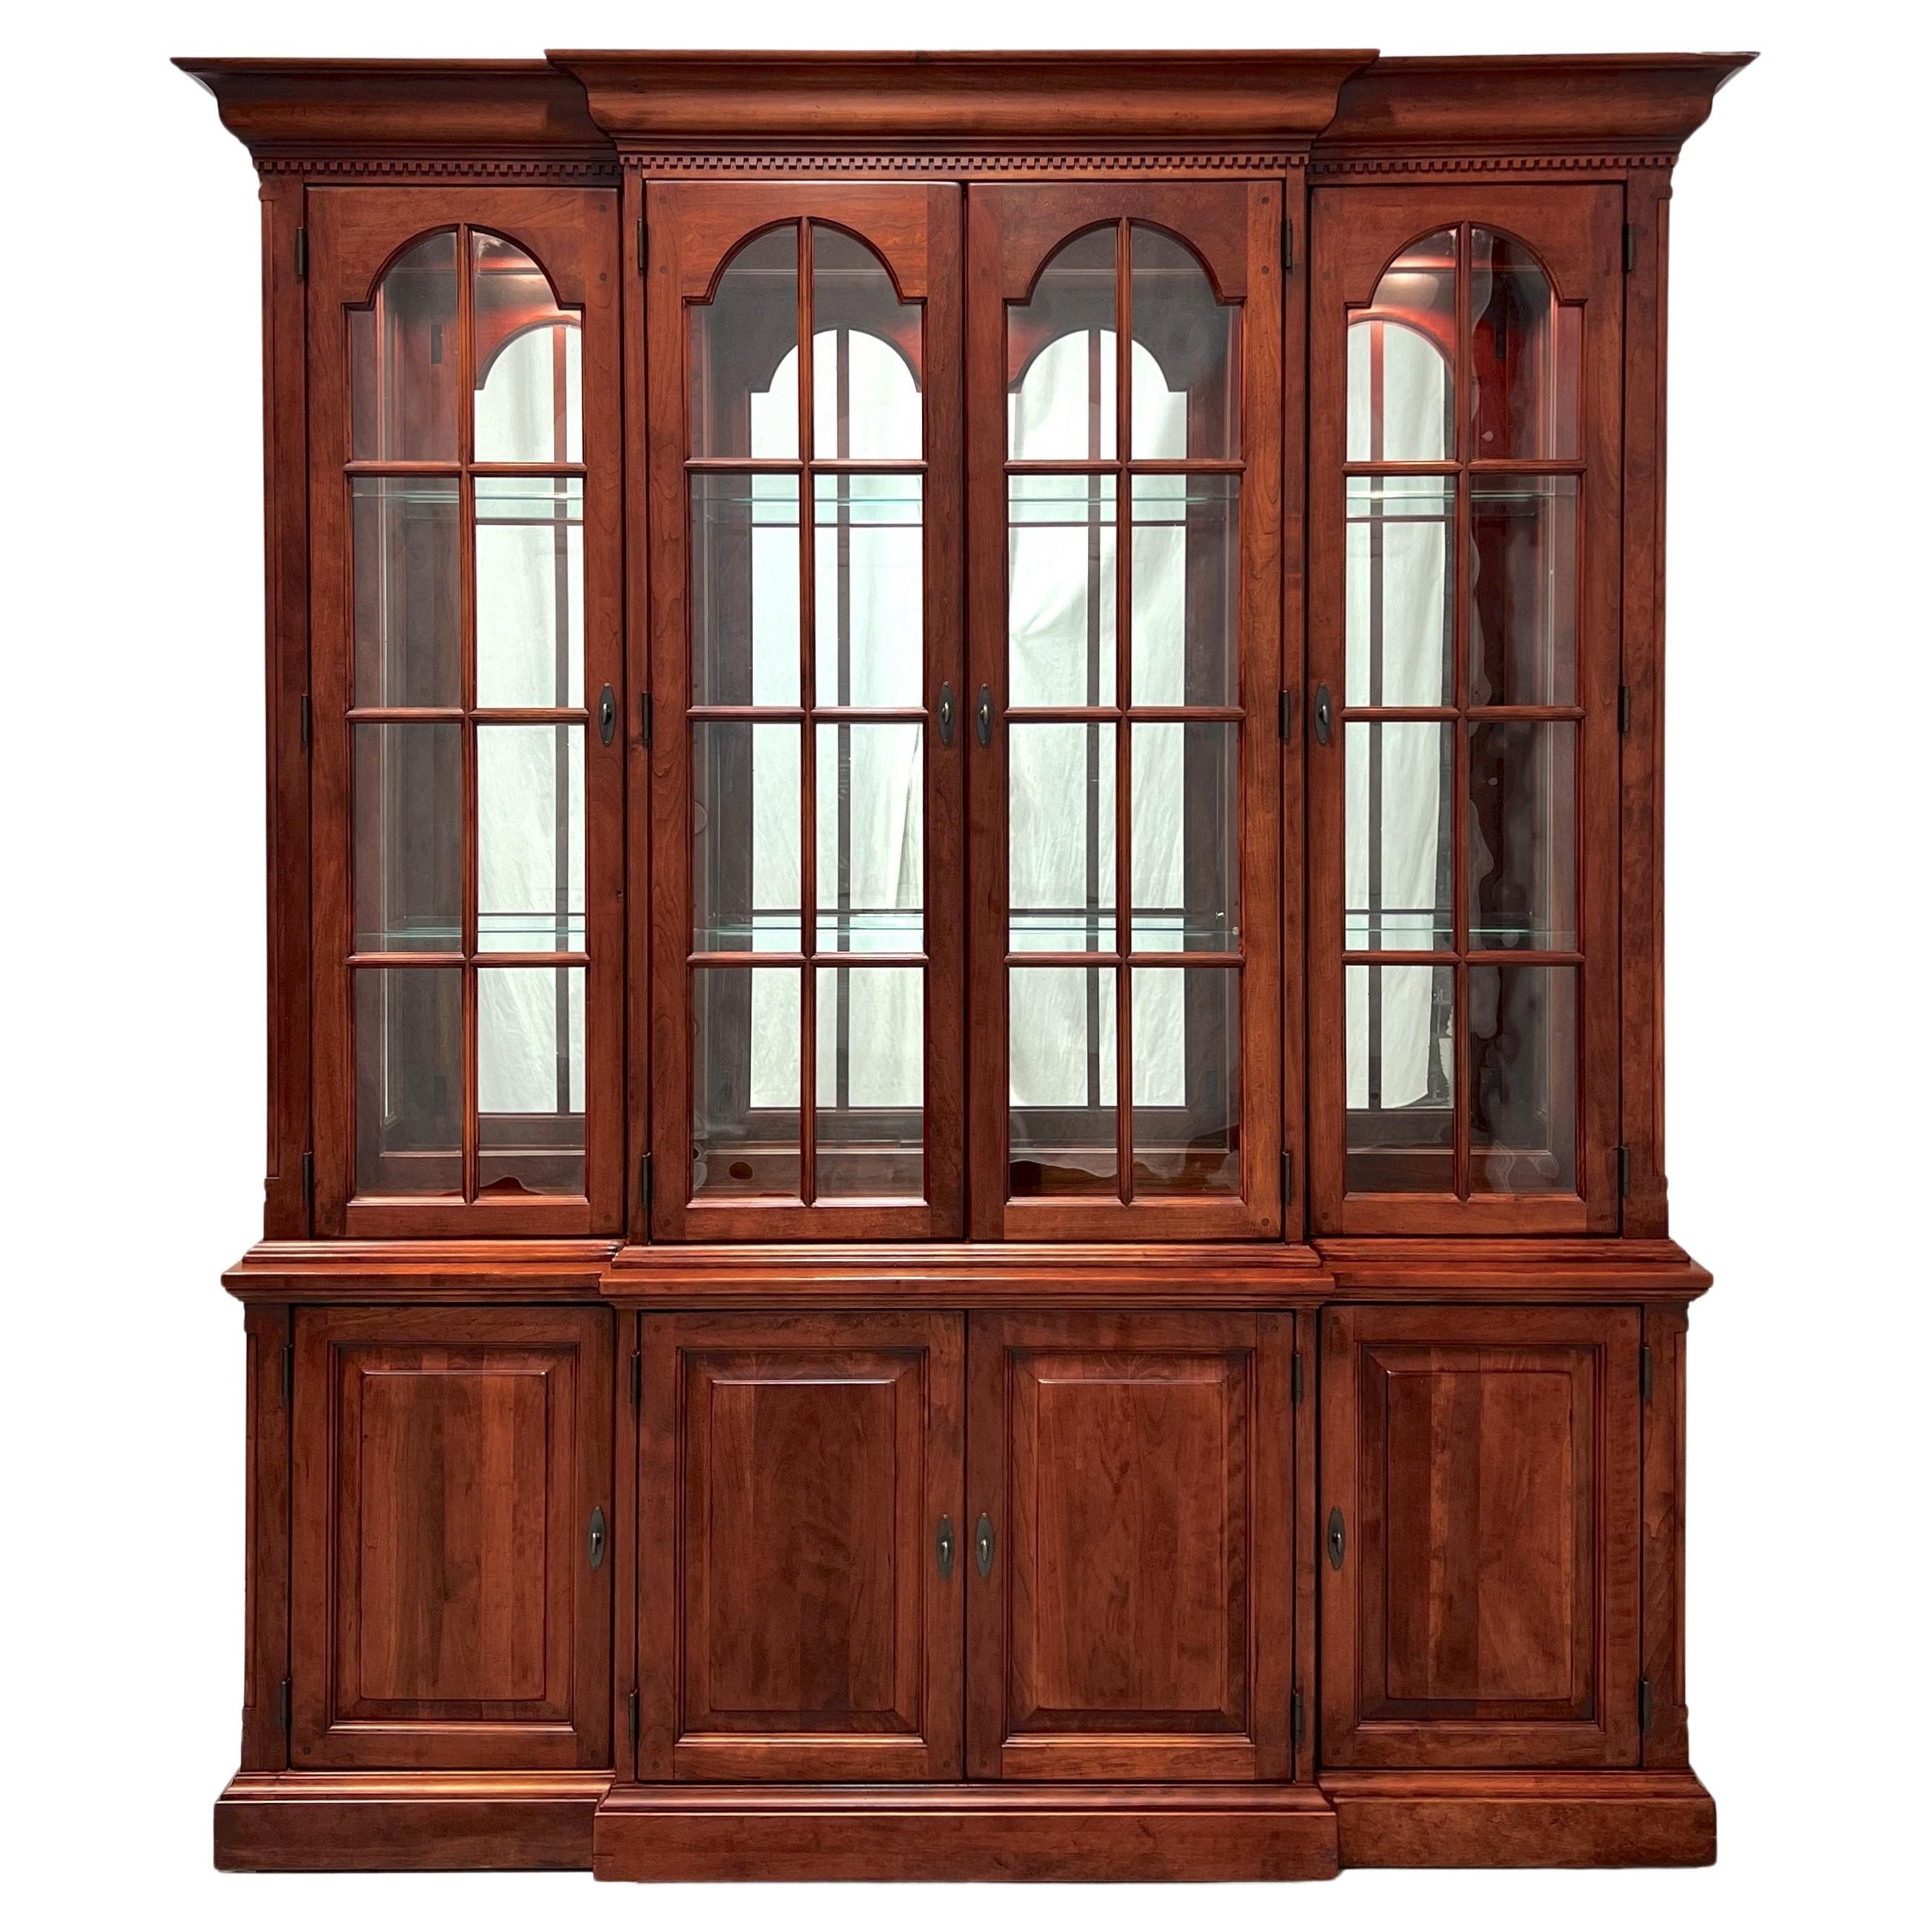 BOB TIMBERLAKE by Lexington Solid Cherry Traditional Breakfront China Cabinet